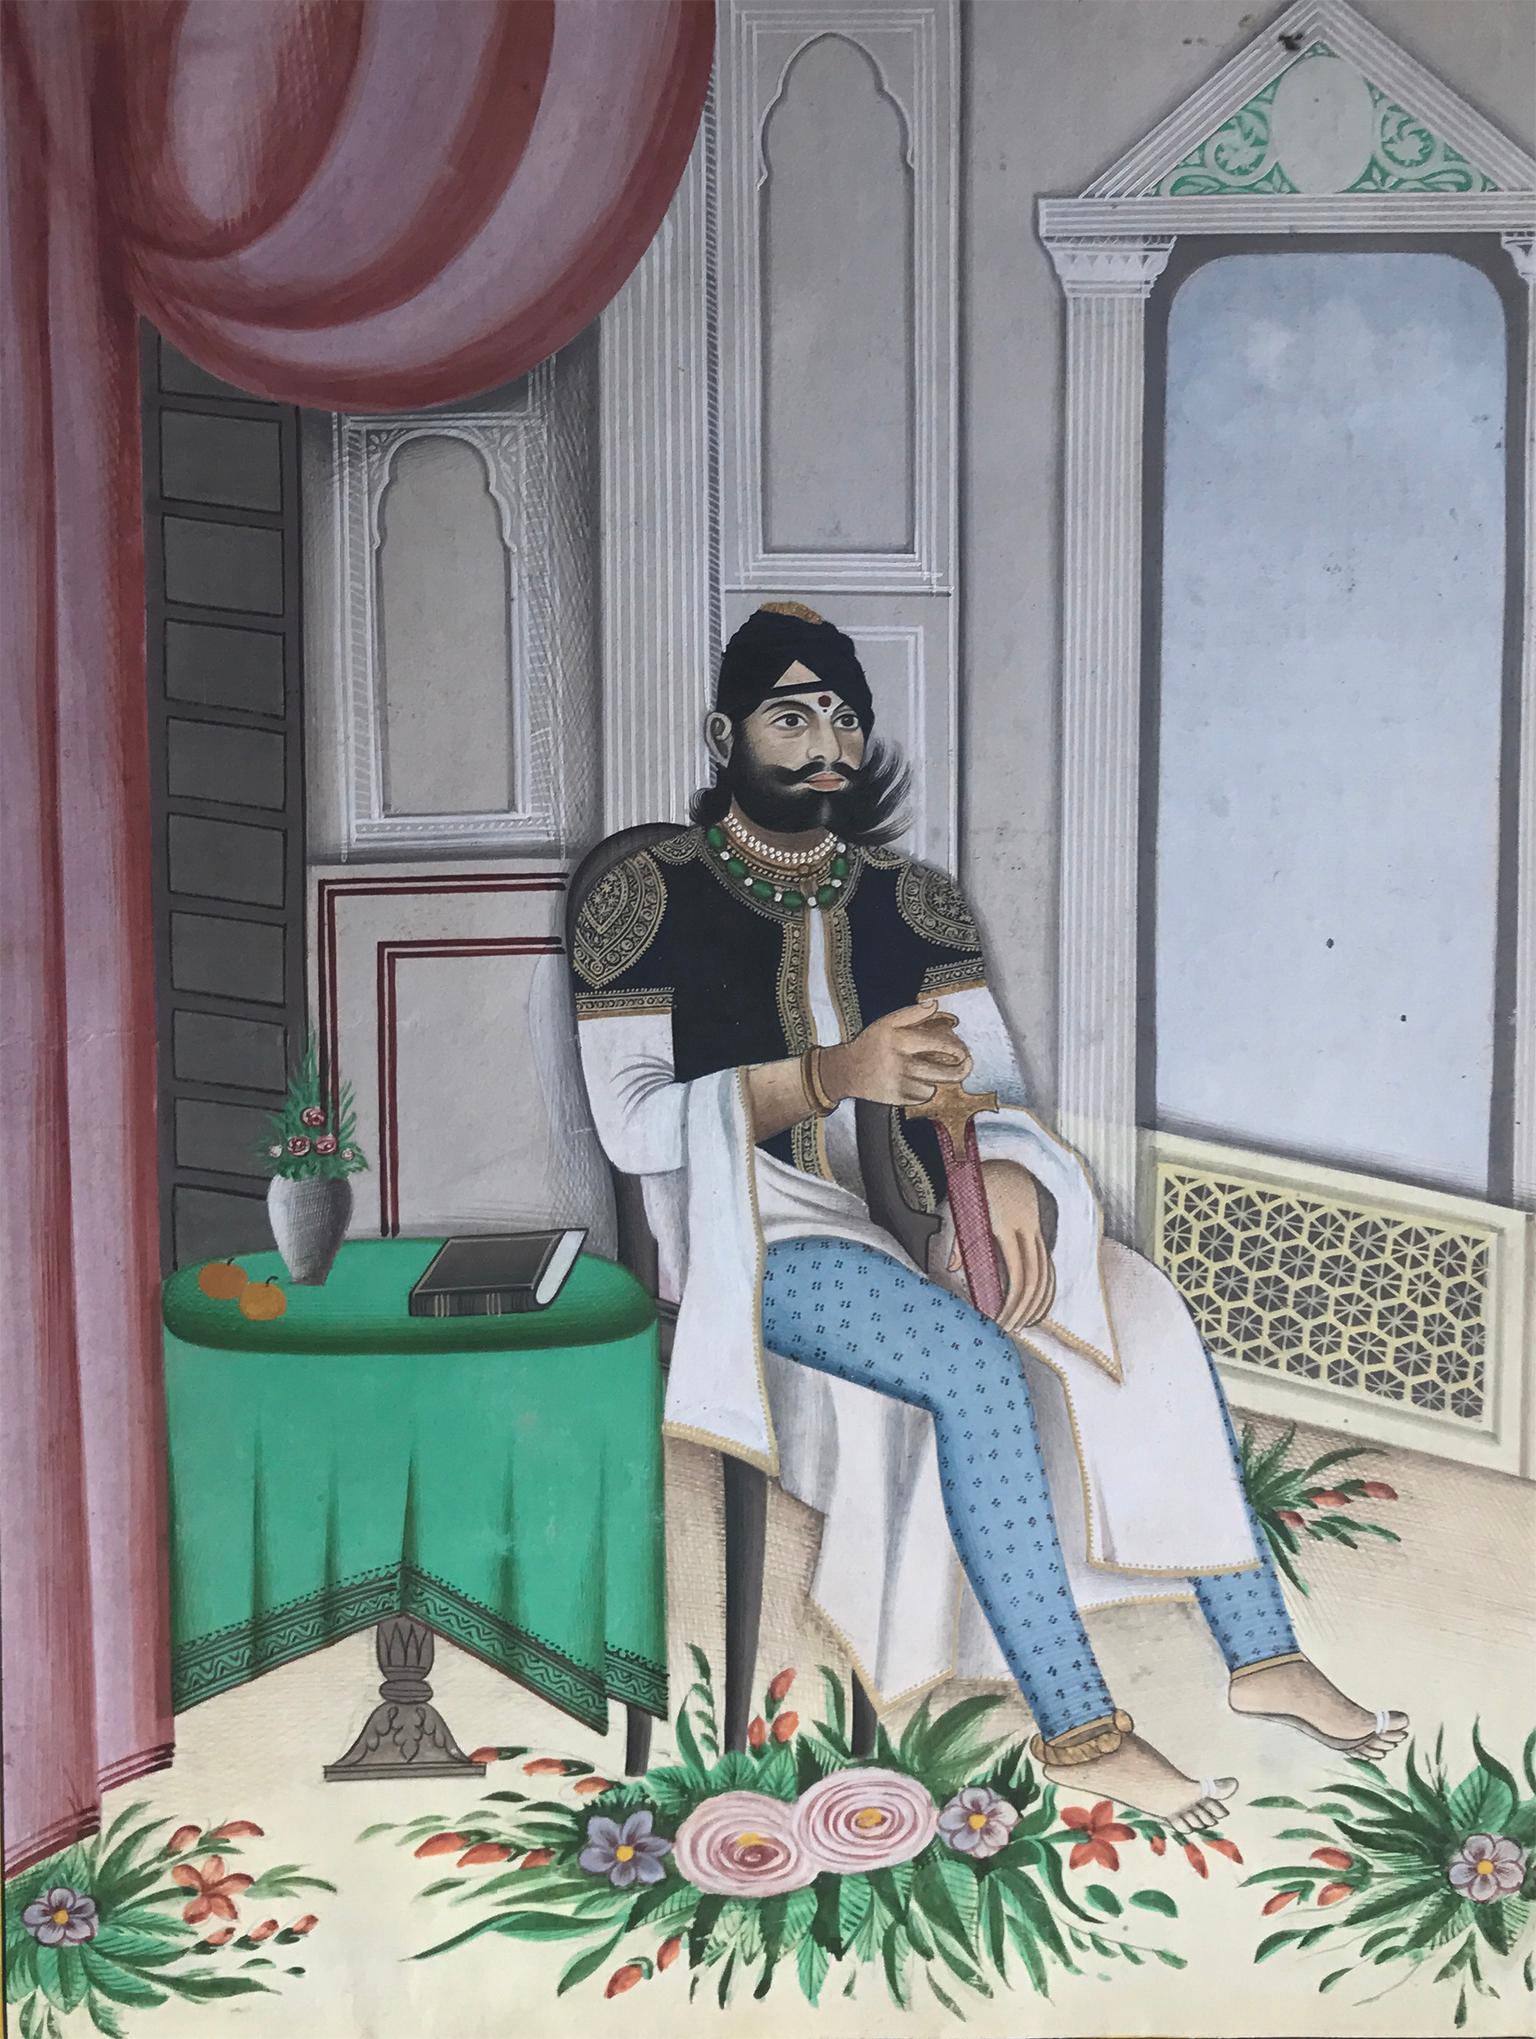 Unknown Figurative Painting - Portrait of a Maharaja - 19th century figurative painting, Indian noble in white